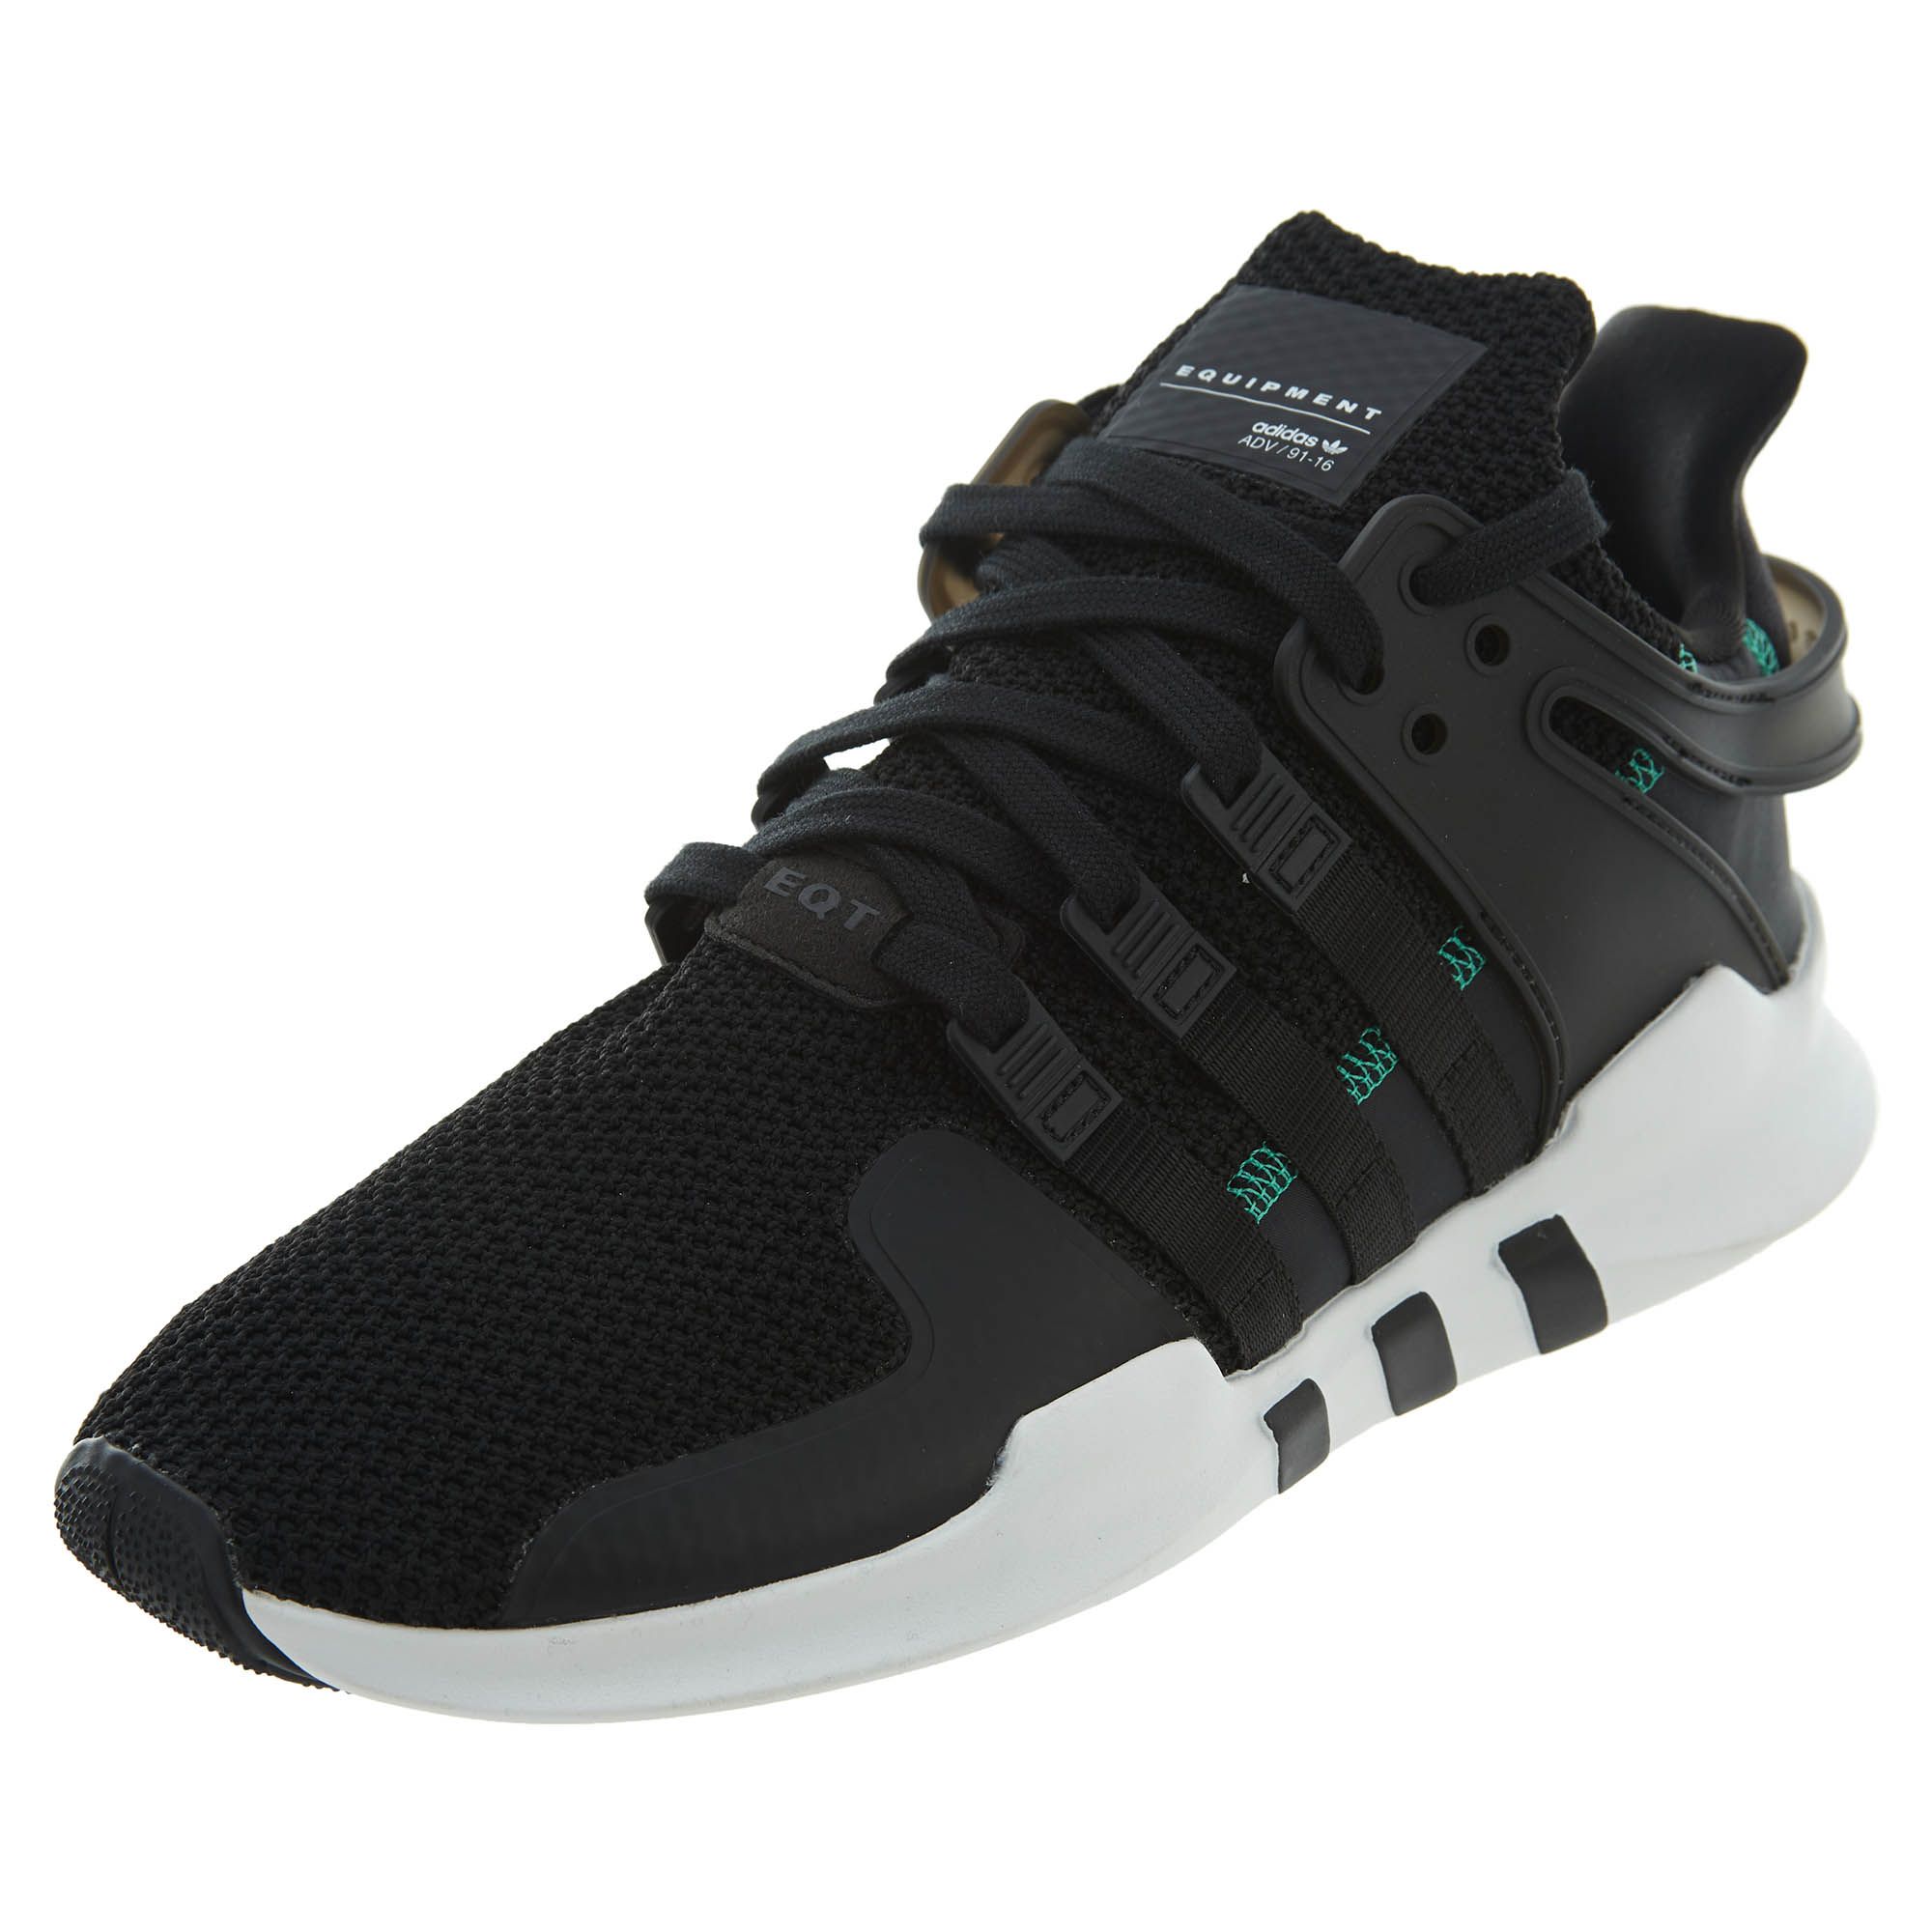 Adidas Eqt Support Adv Mens Style 